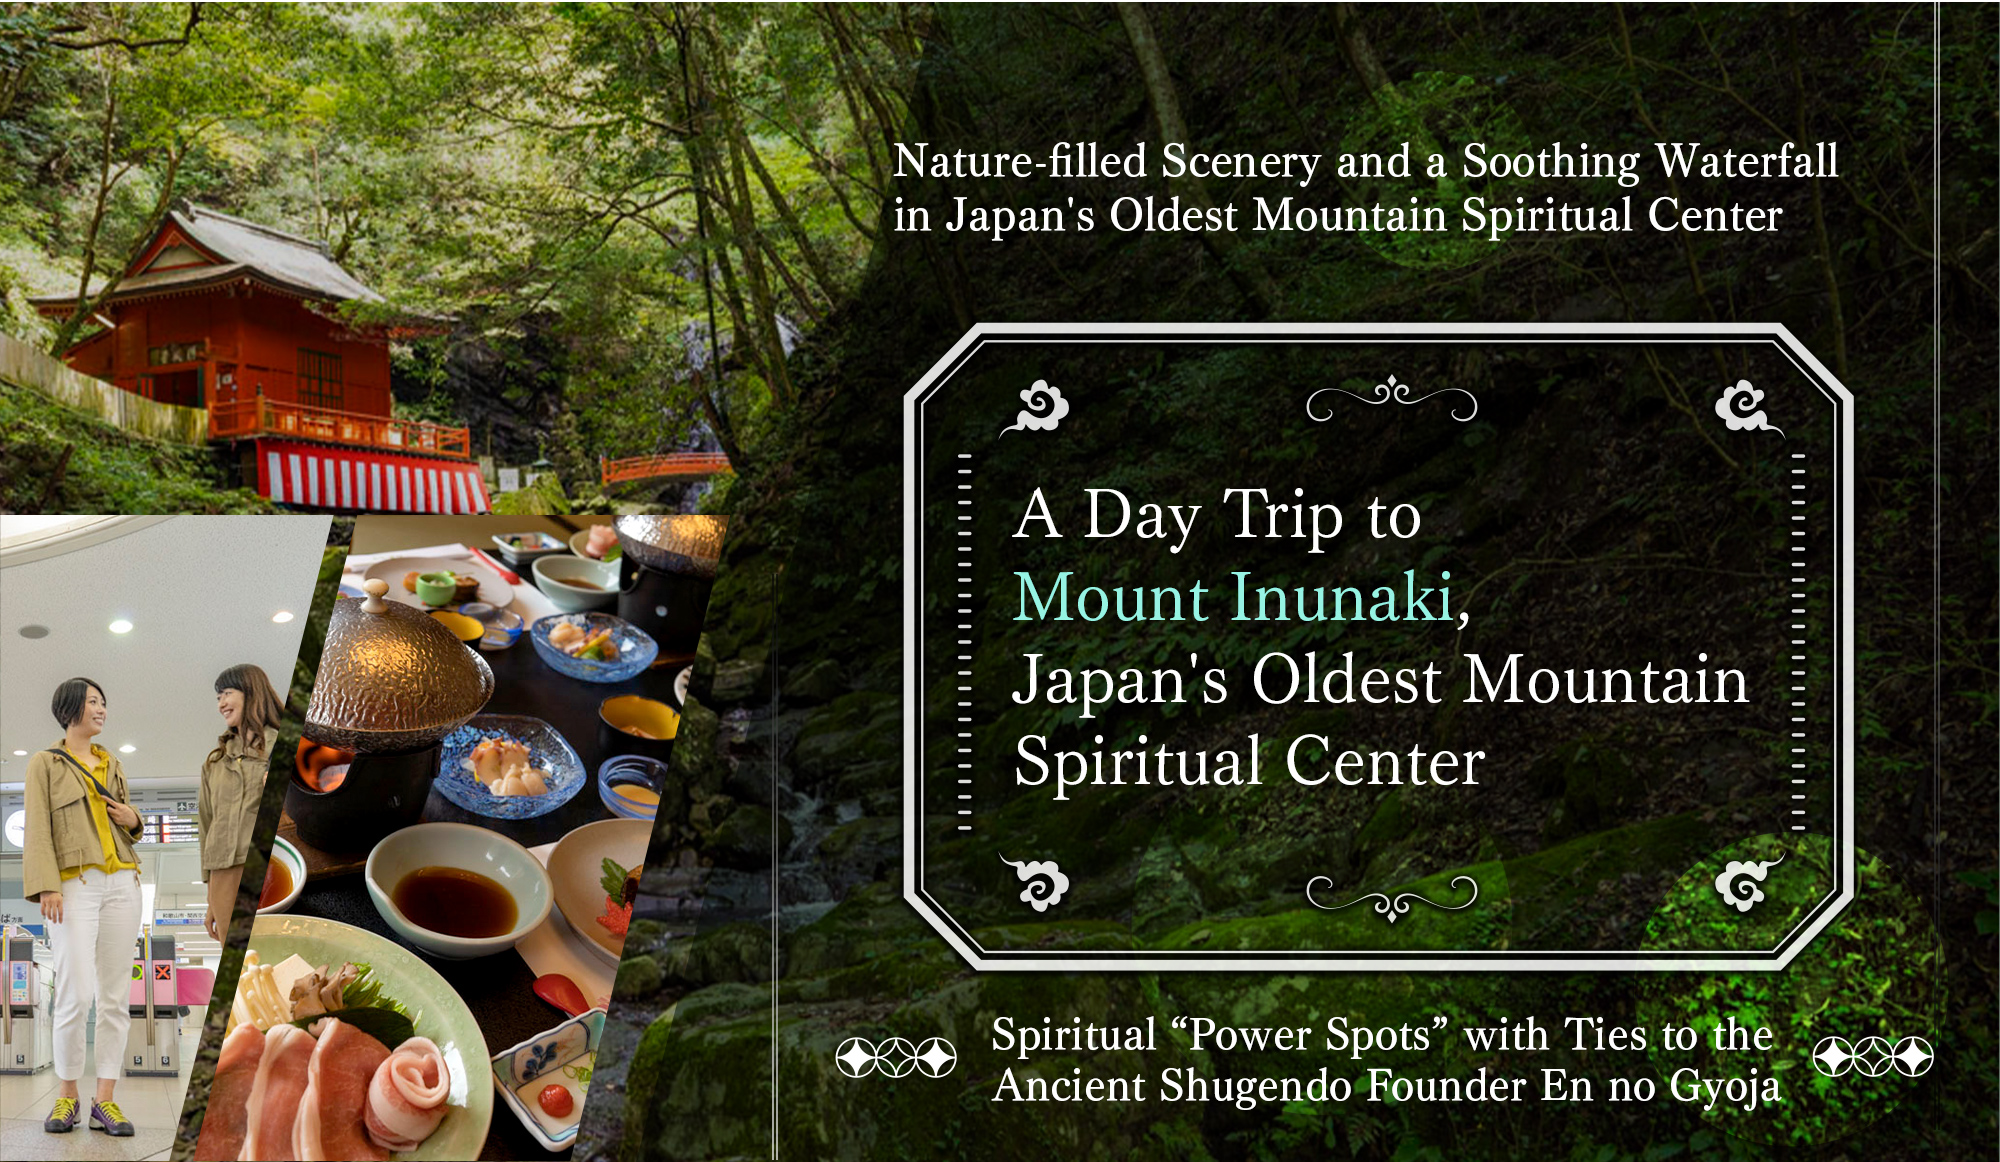 Day Trip to Mount Inunaki: Nature-filled Scenery and a Soothing Waterfall in Japan's Oldest Mountain Spiritual Center